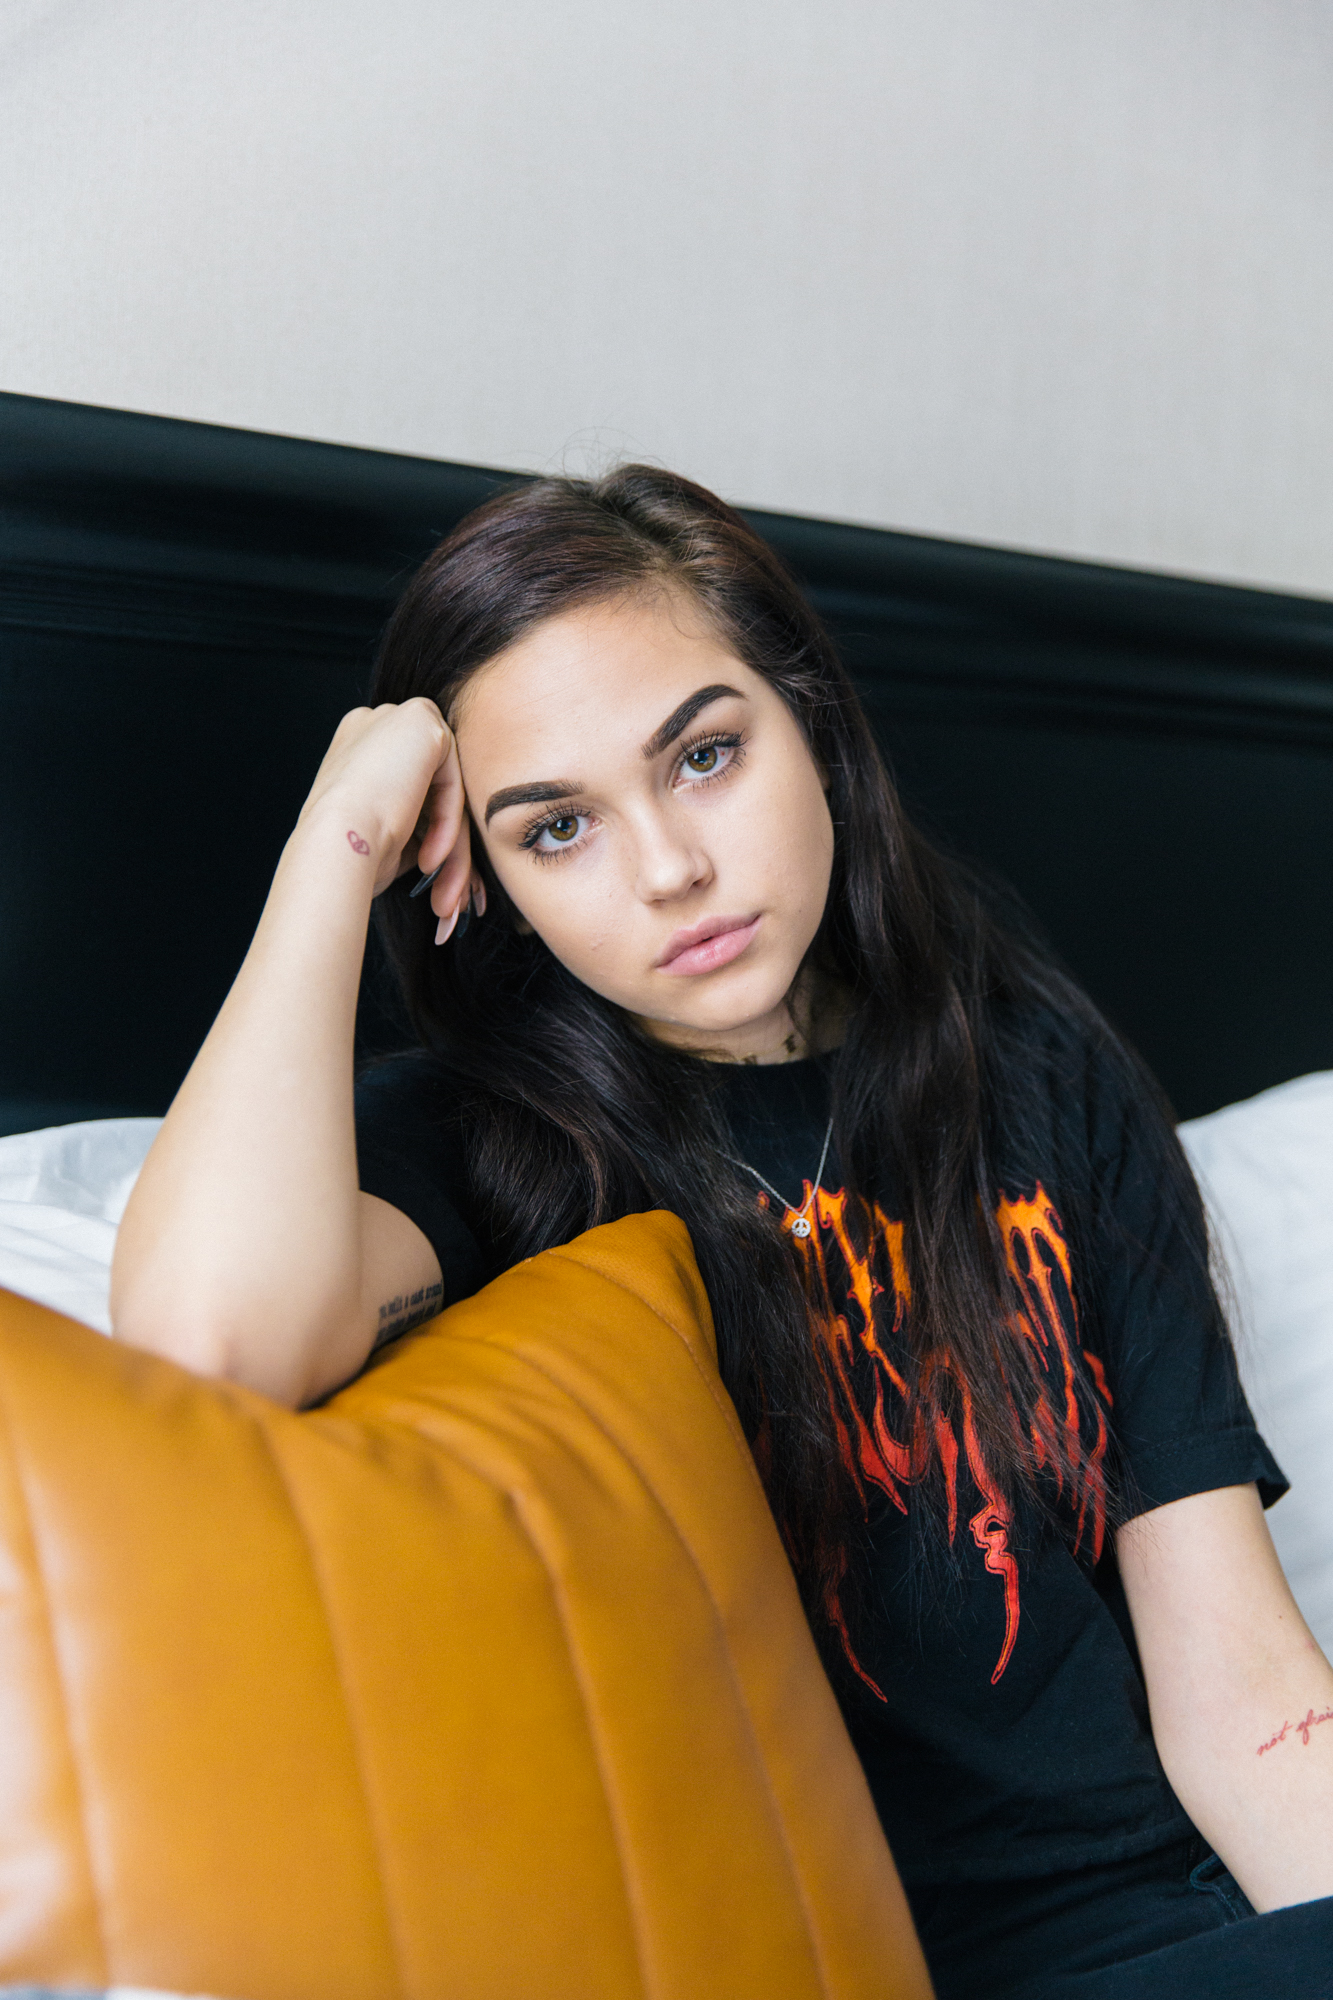 Singer Maggie Lindemann On Her New Video, Tattoos, and More - Coveteur